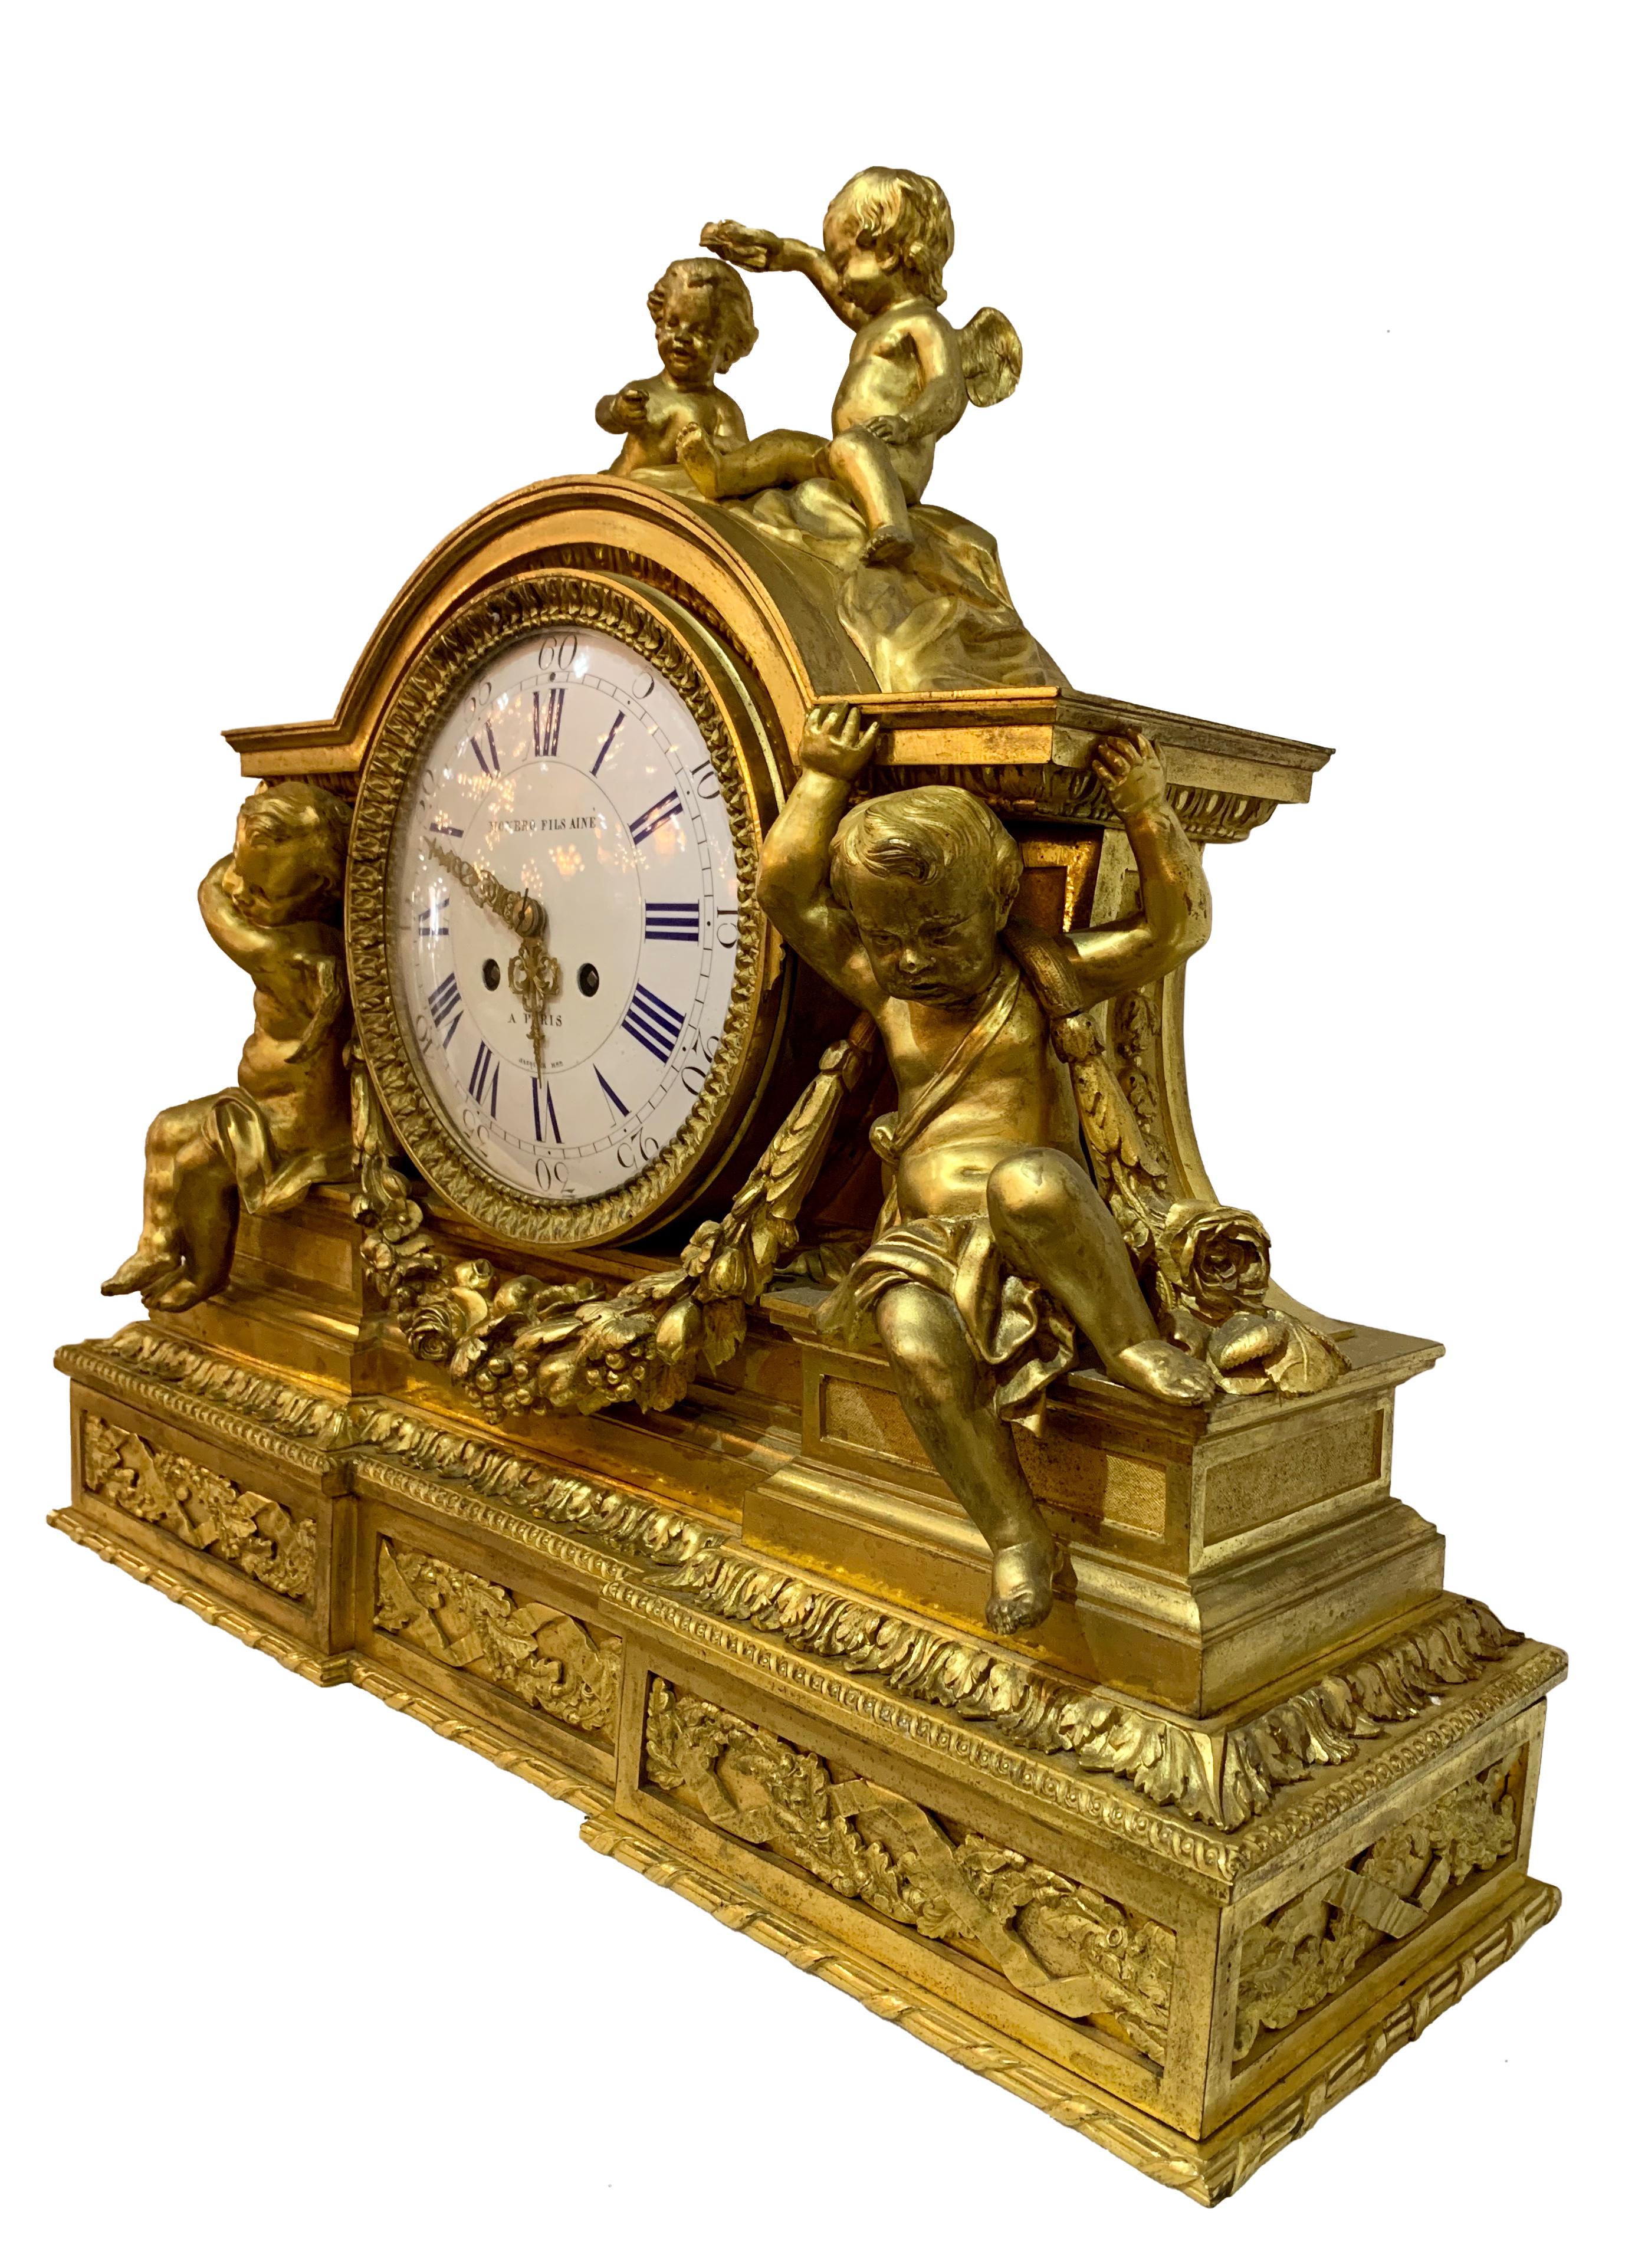 Imposing 19th century French Napoleon III Gilt Bronze striking Mantel clock. Flanked by two sitting cherubs and another two cherubs on top, this is another example of a fine French mantel clock.

This particular clock was crafted by famed French